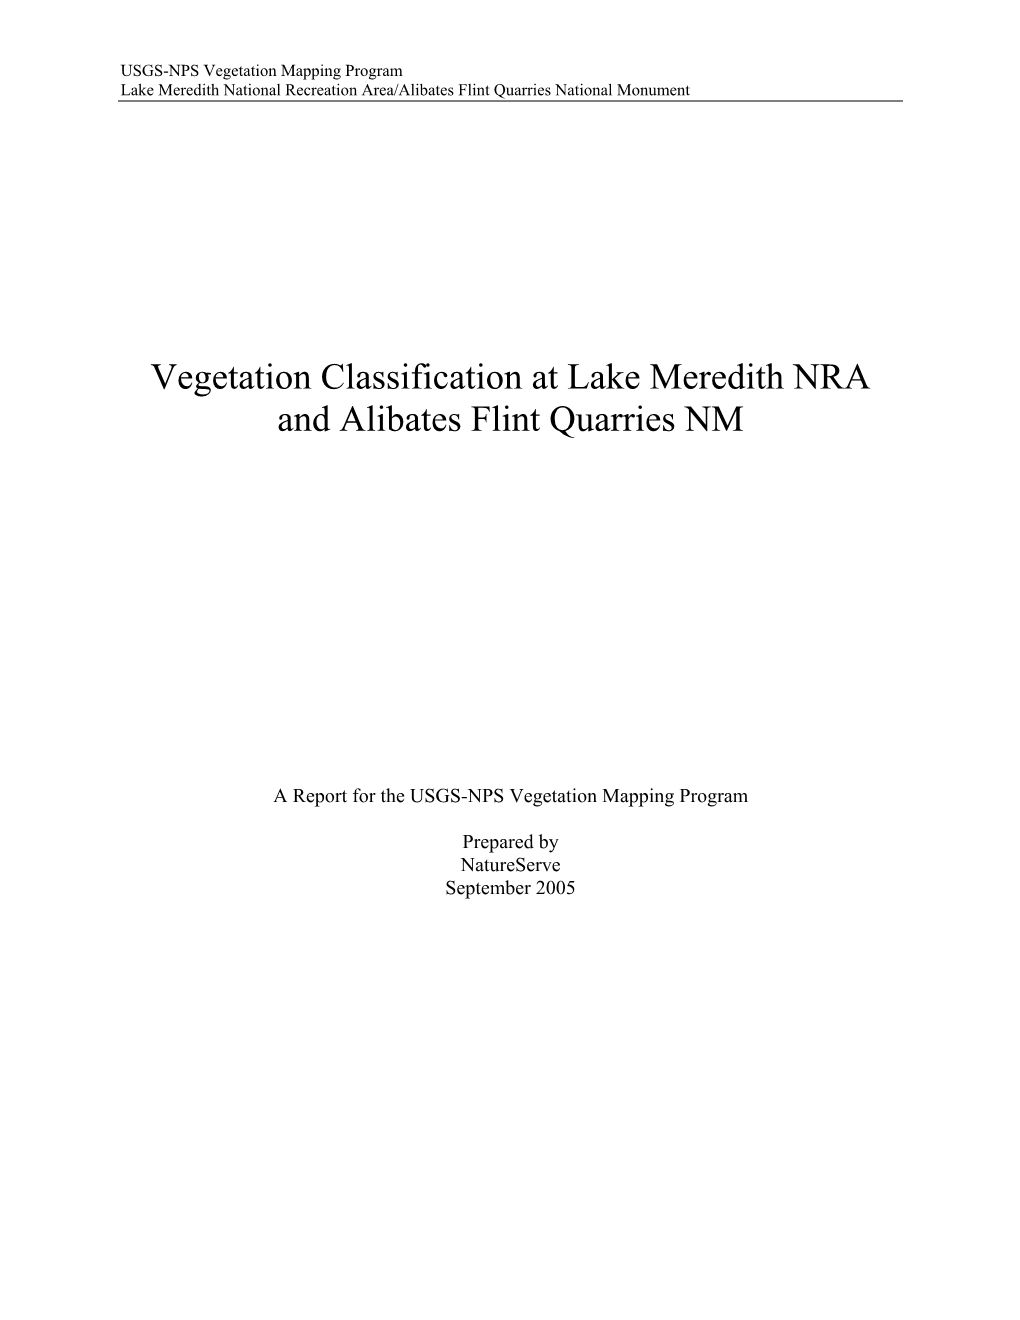 Vegetation Classification and Mapping Project Appendices